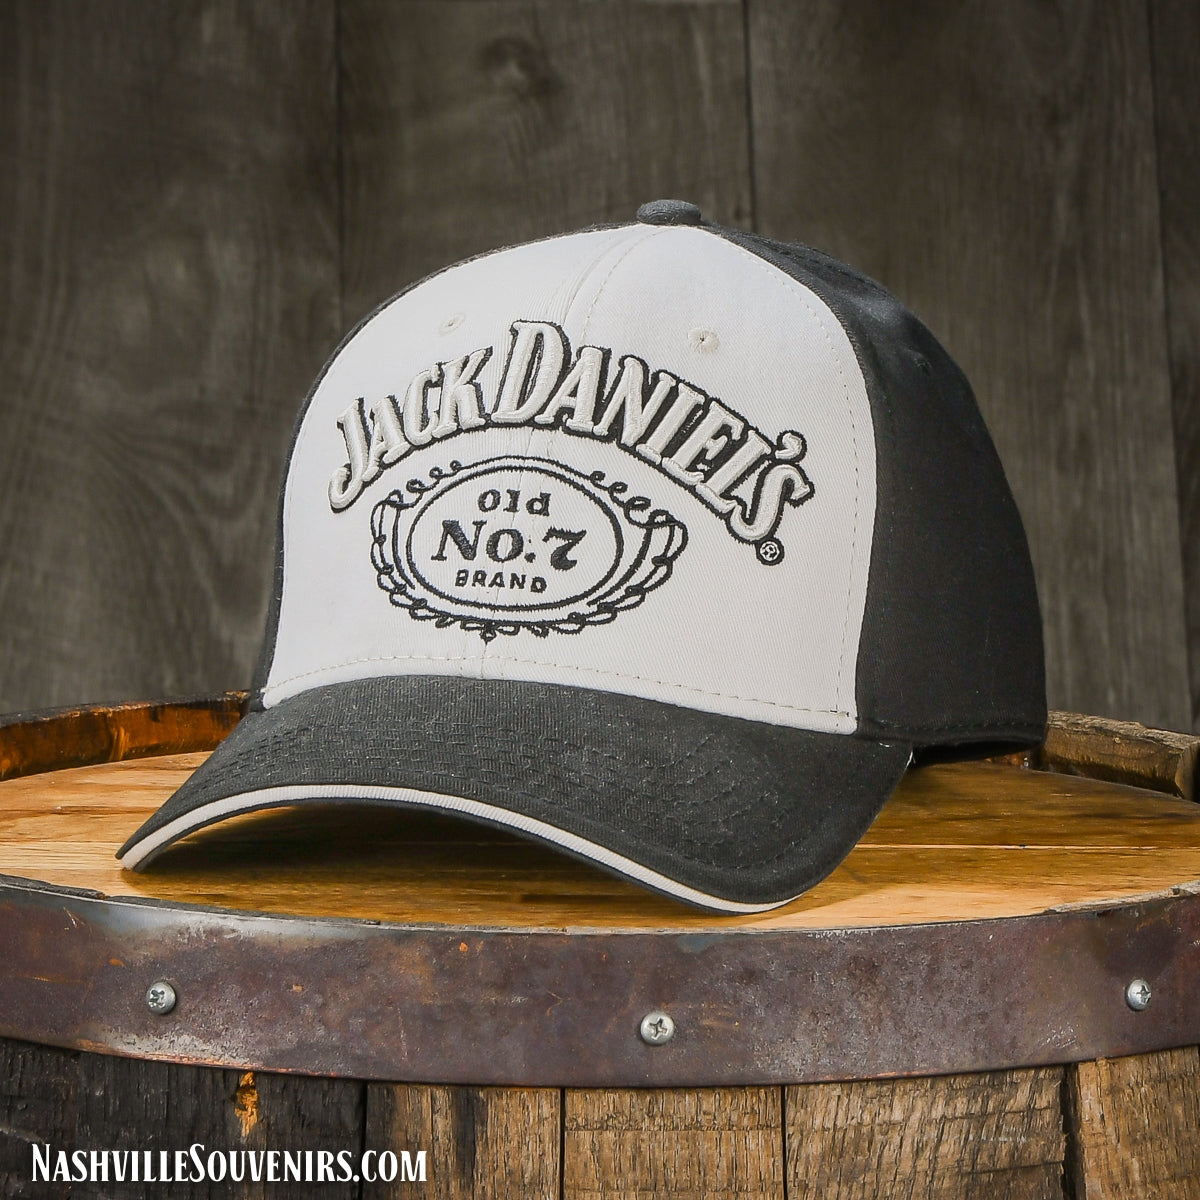 Where's Jack? Now you know. Get a Jack Daniels Jack Lives Here Hat today with FREE SHIPPING on U.S. orders over $75!